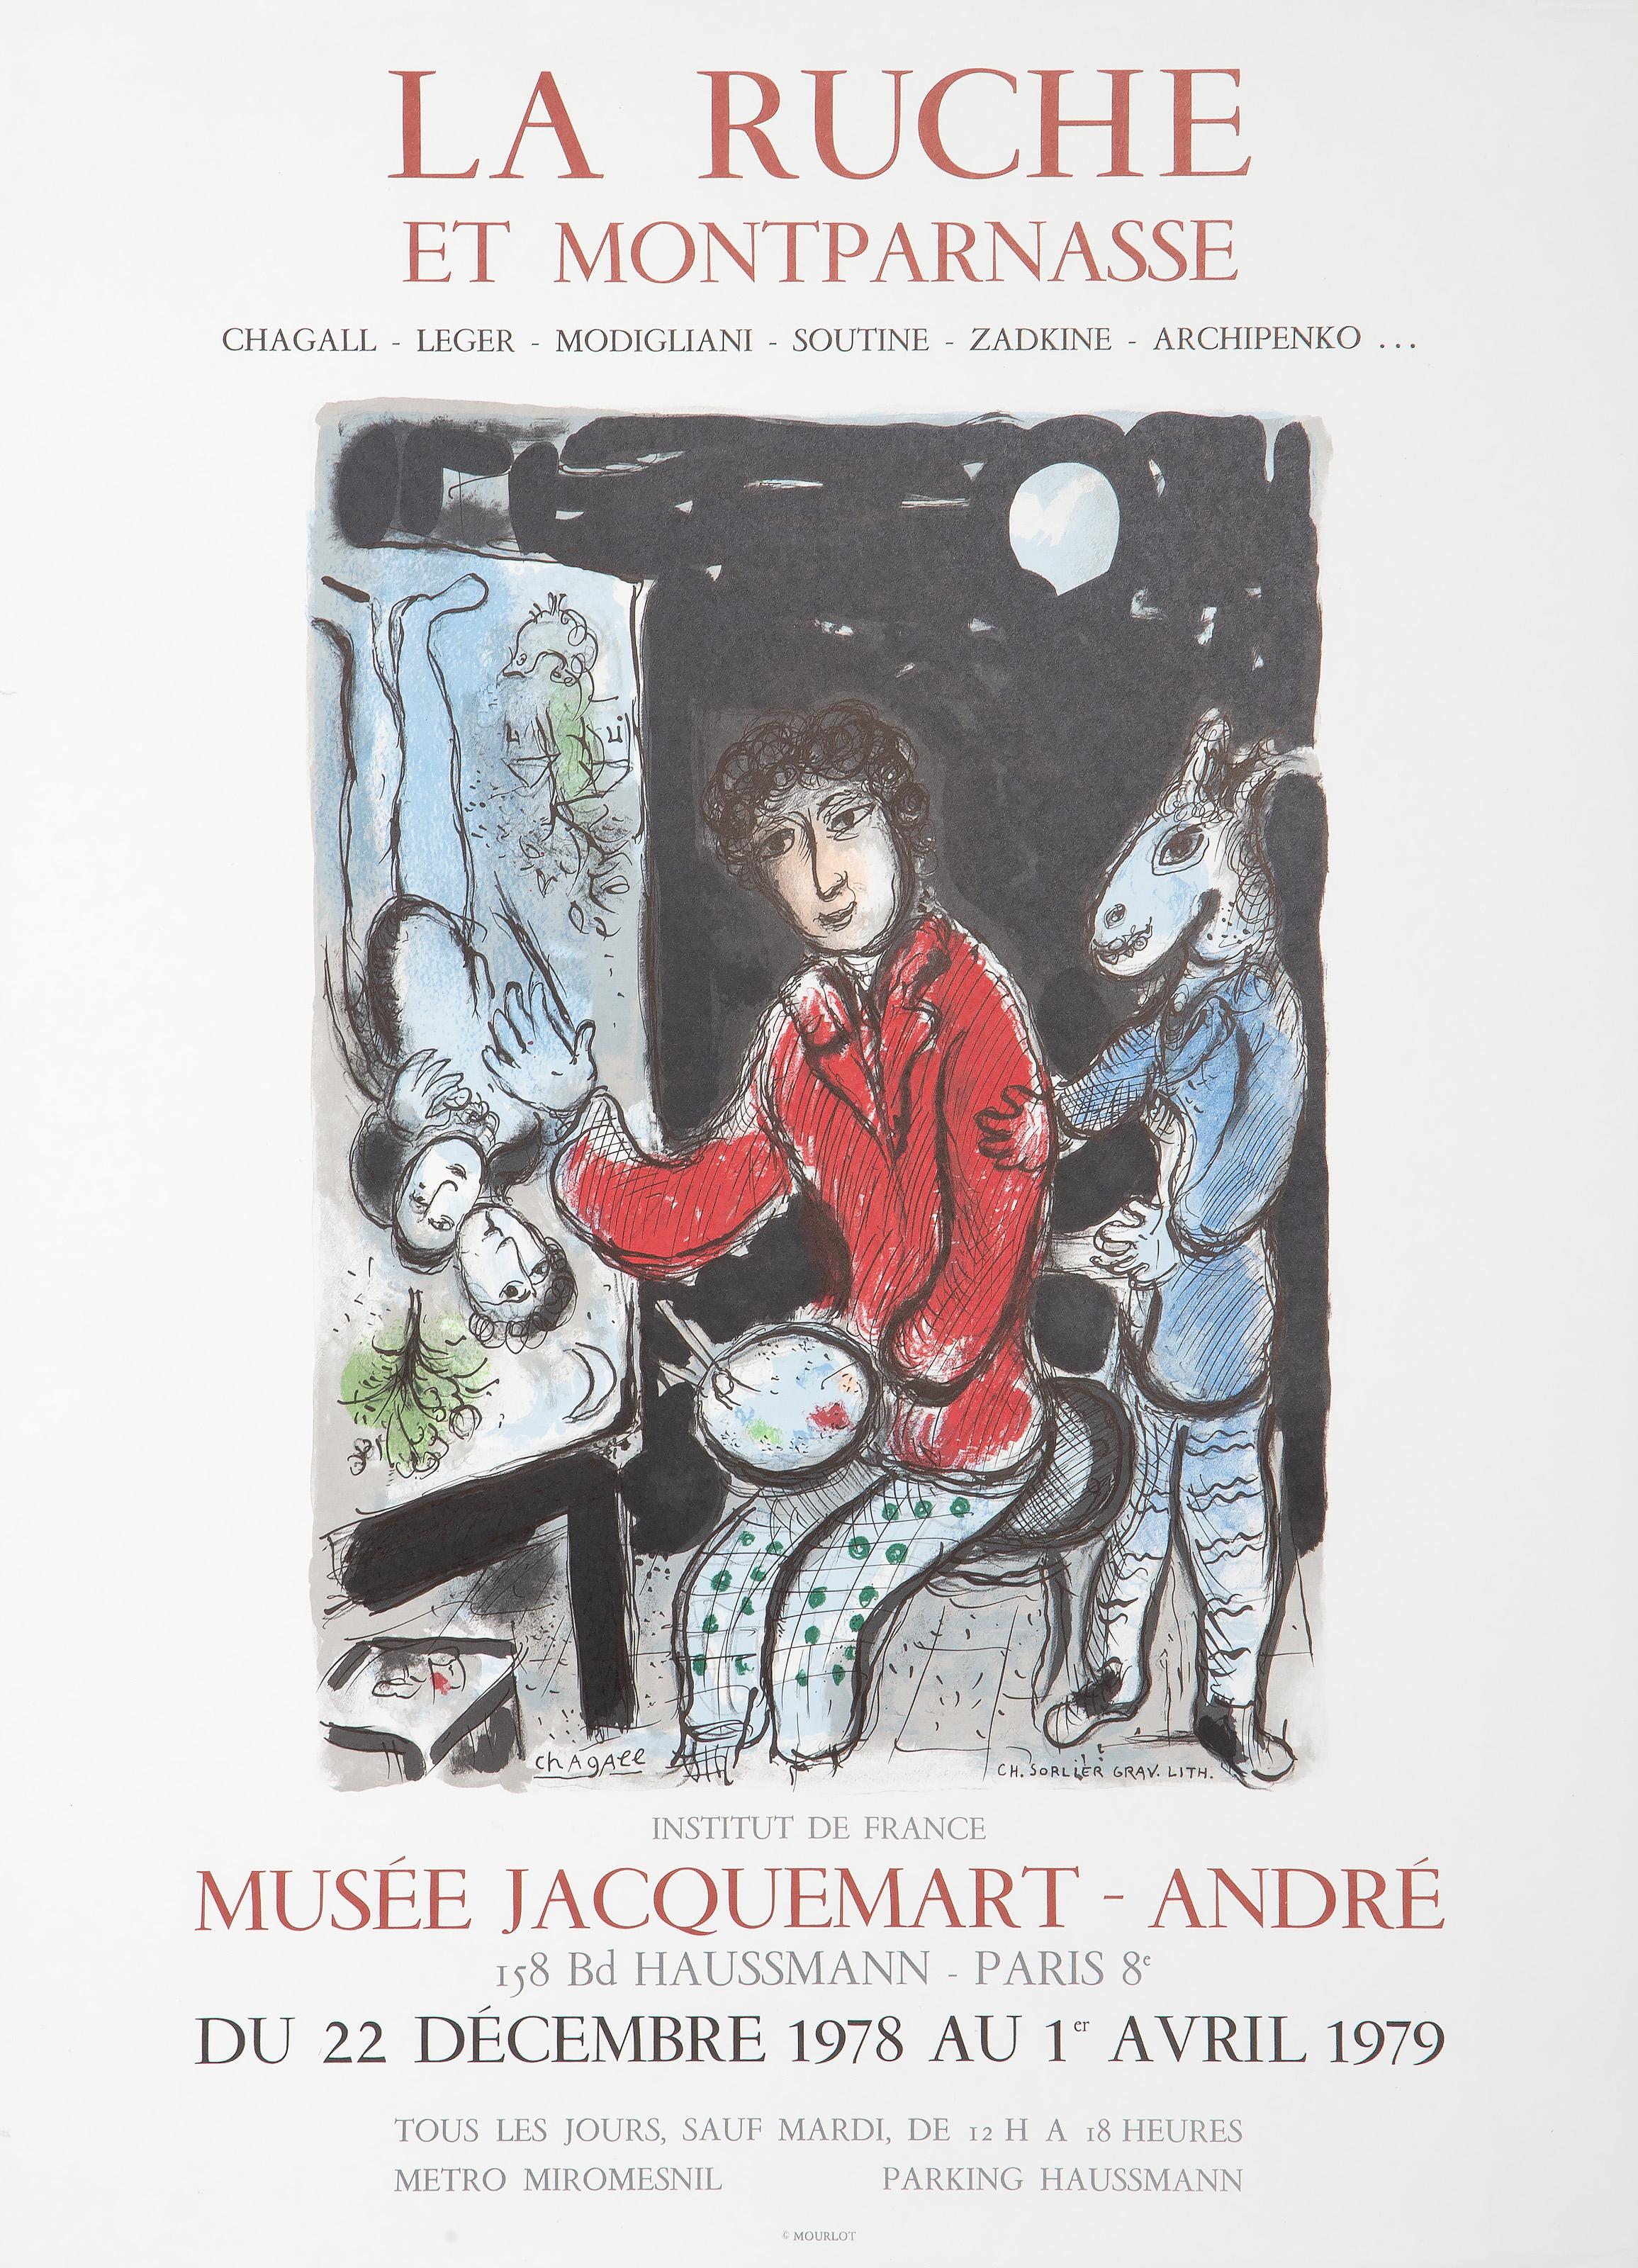 Marc Chagall, After by Charles Sorlier, Russian (1887 - 1985) -  Musee Jacquemart - Andre. Year: 1978, Medium: Lithograph Poster, Size: 29 x 21.25 in. (73.66 x 53.98 cm), Printer: Mourlot, Paris 